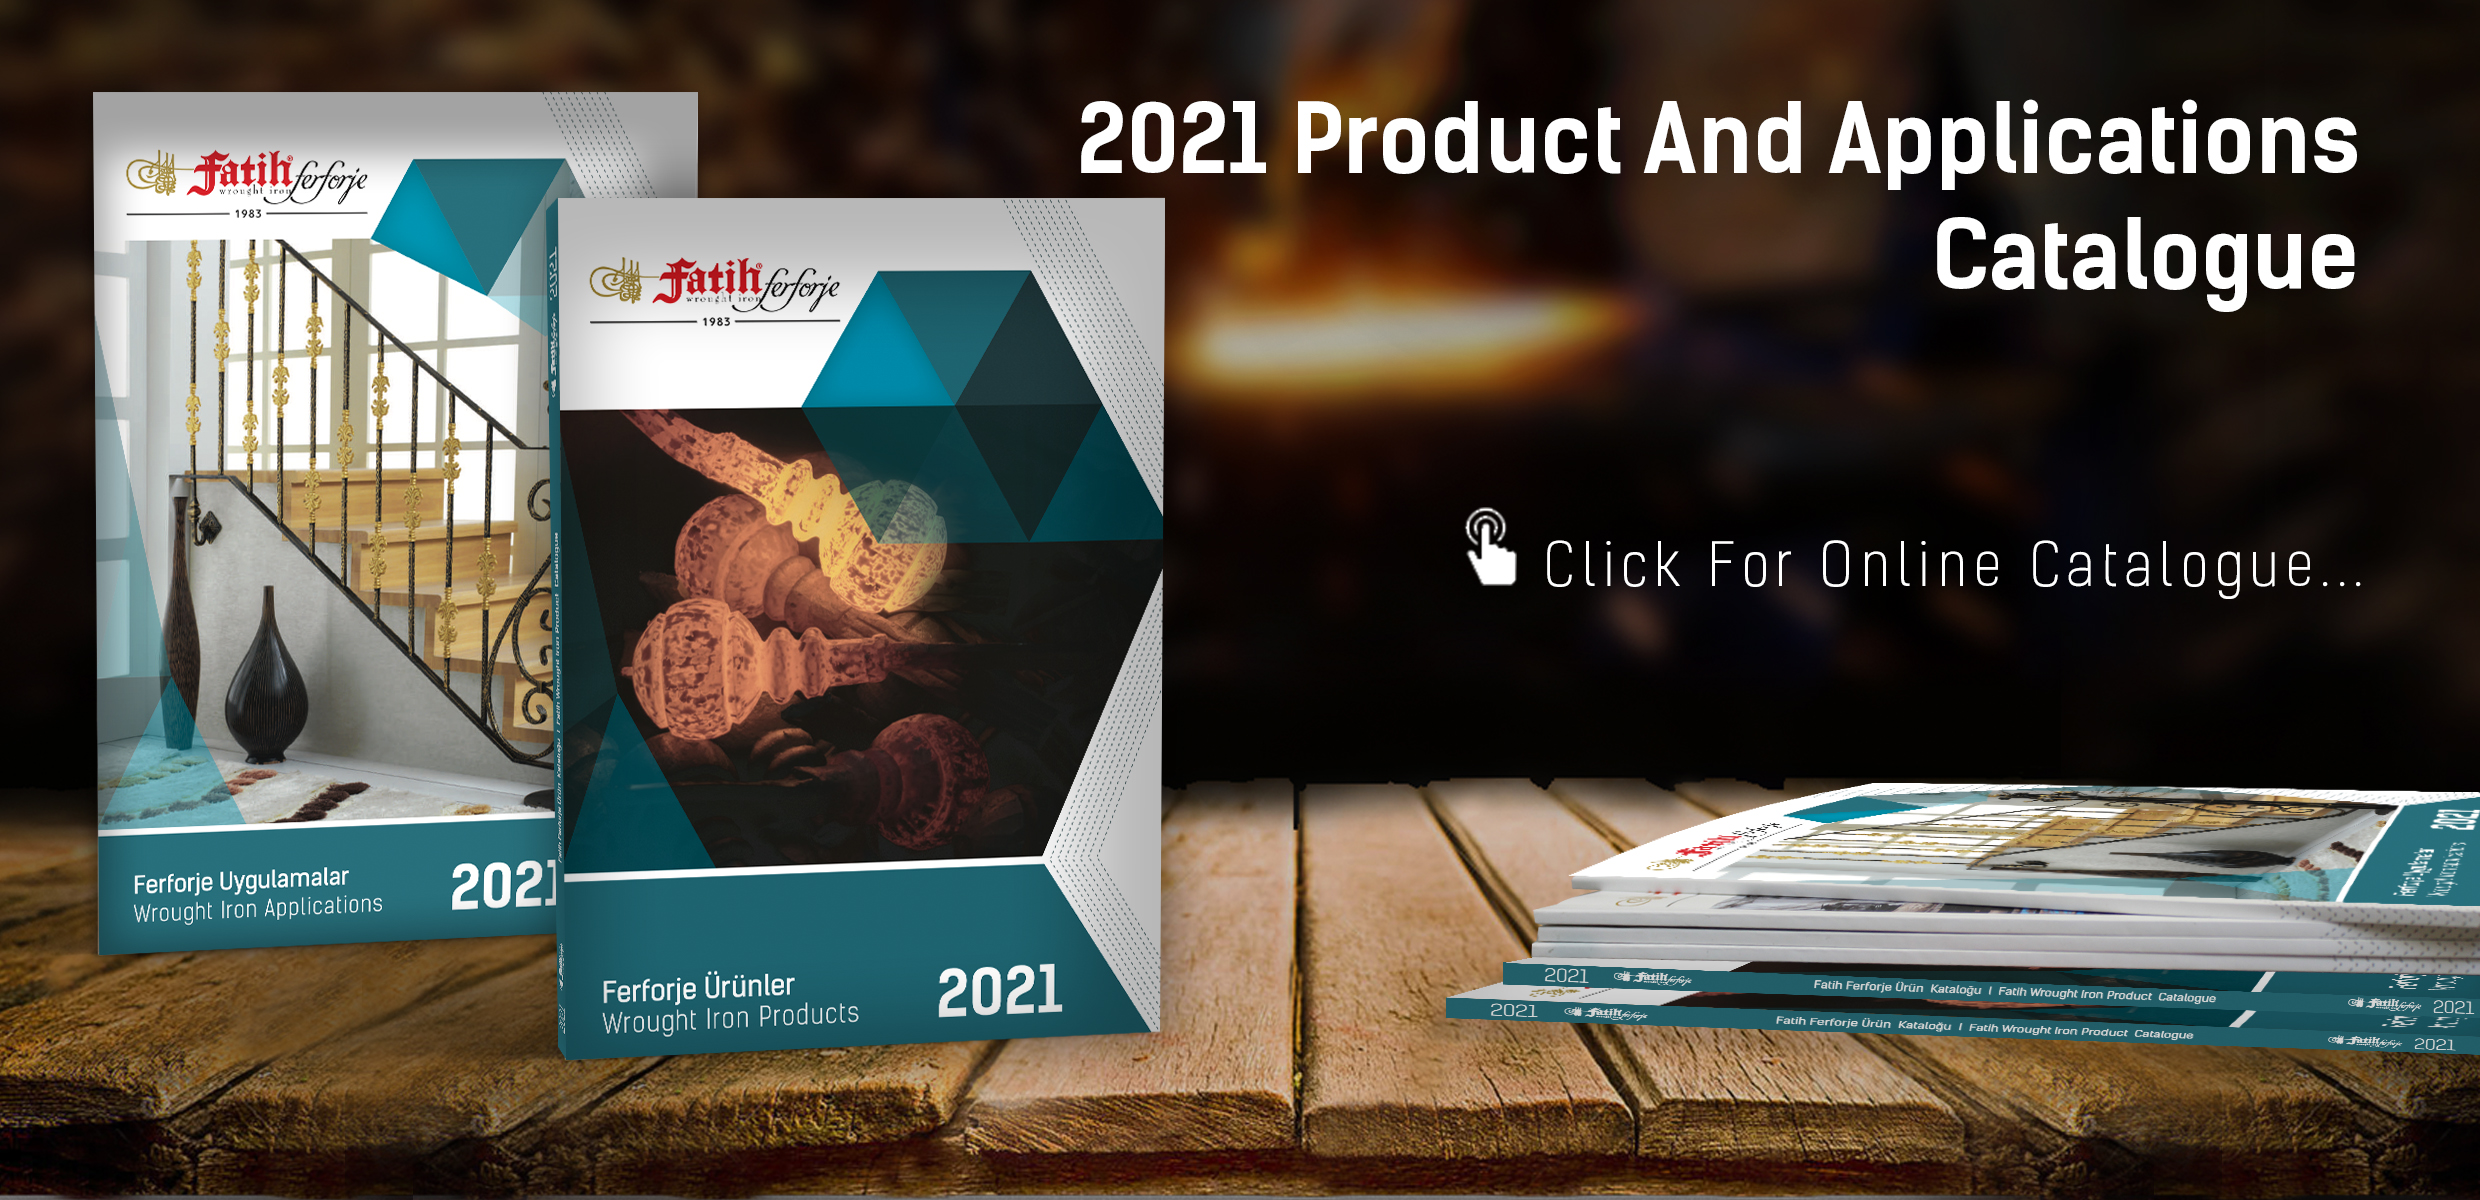 2021 Product And Applications